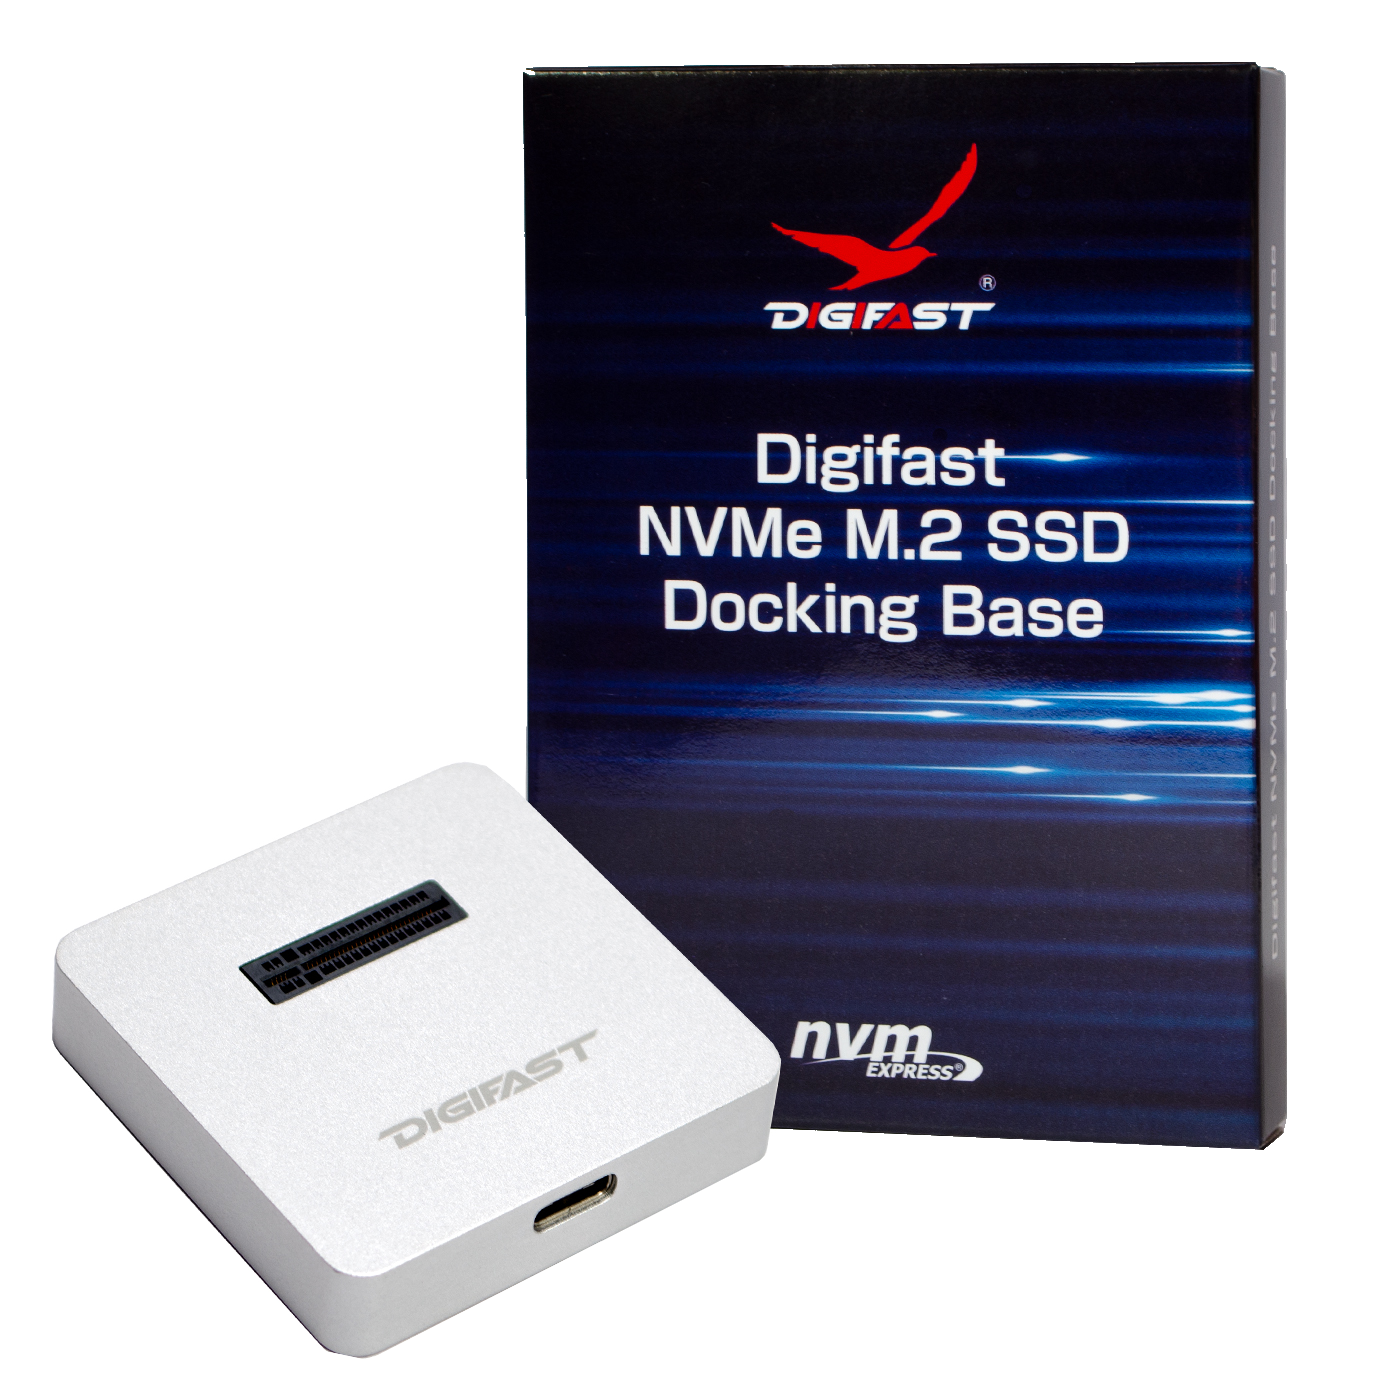 Digifast silver NVMe docking base with product packaging